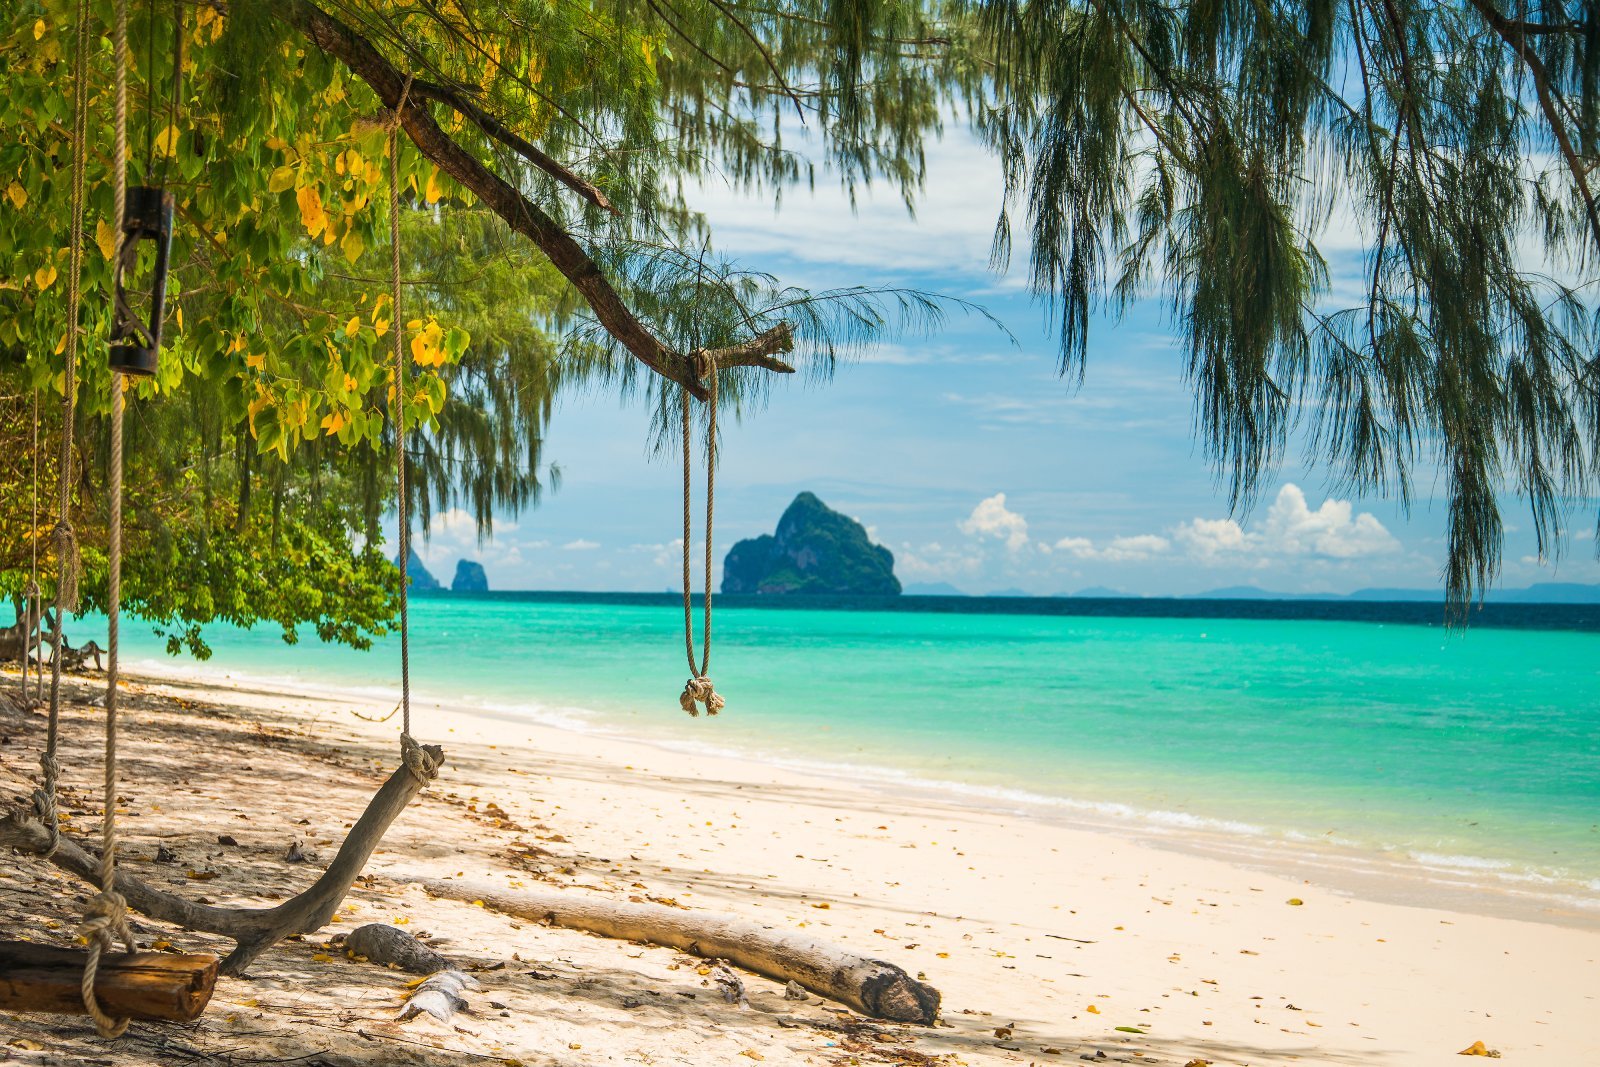 <p class="wp-caption-text">Image Credit: Shutterstock / JKI14</p>  <p><span>Koh Kradan, part of the enchanting Trang Archipelago, is celebrated for its crystal-clear waters and powdery white sand beaches, making it a slice of paradise for beach lovers and snorkelers. The island’s underwater wedding ceremony, an annual event, adds a unique cultural highlight, drawing couples from across the globe to exchange vows in an aquatic setting. Despite its growing popularity, Koh Kradan has retained a sense of untouched beauty, with minimal development ensuring that its natural landscapes remain pristine. Just a short swim from the shore, the coral reefs are alive with colorful marine life, offering easy access to some of Thailand’s most vibrant underwater ecosystems. Koh Kradan embodies the delicate balance between accessibility and preservation, offering a tranquil escape into the heart of Thailand’s marine splendor.</span></p>